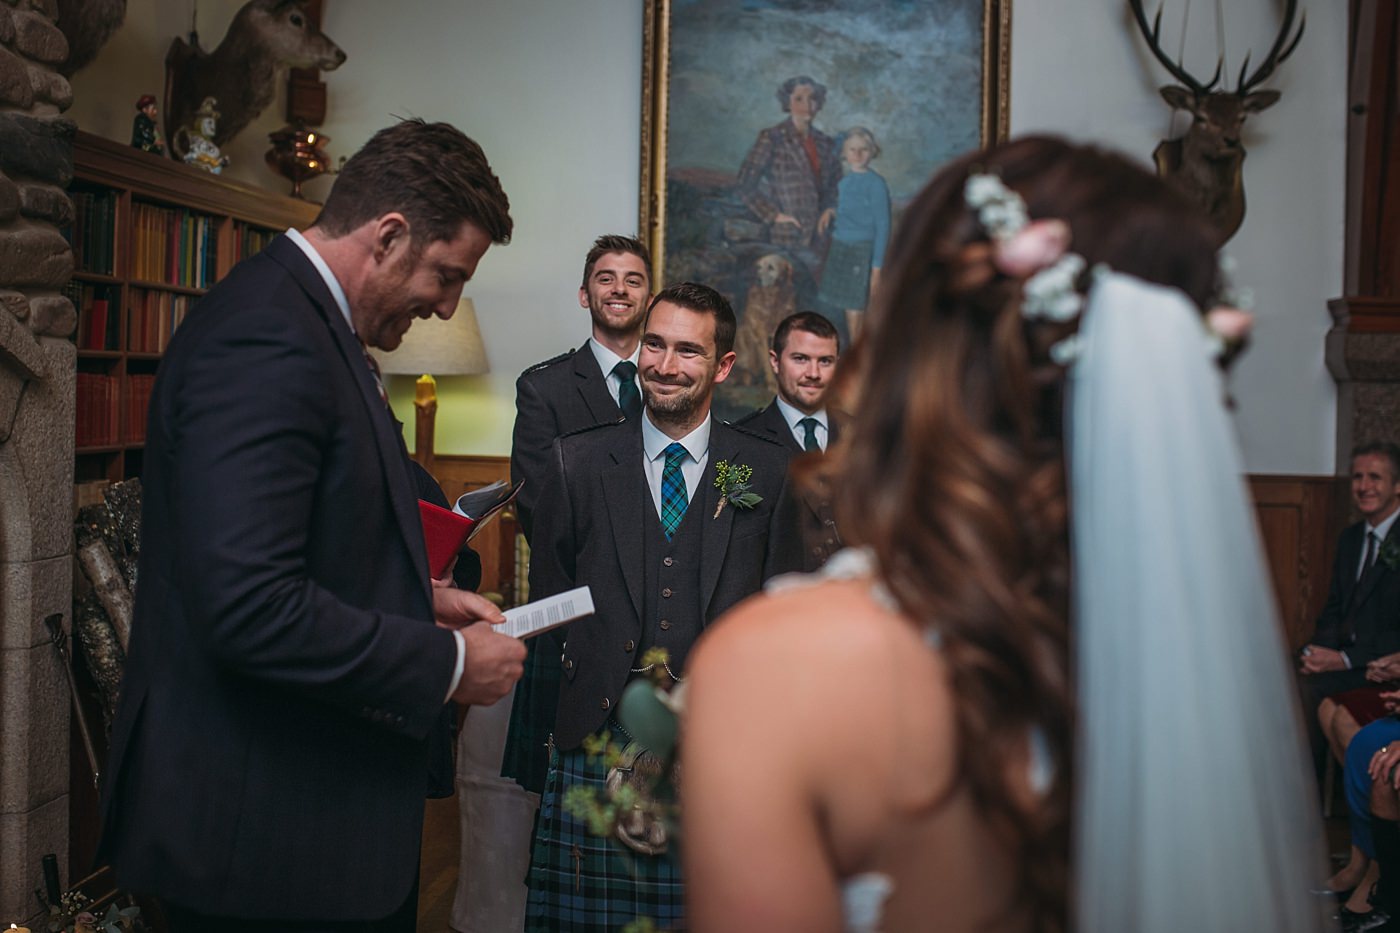 Groom during ceremony at his Christmas wedding at Glen Tanar